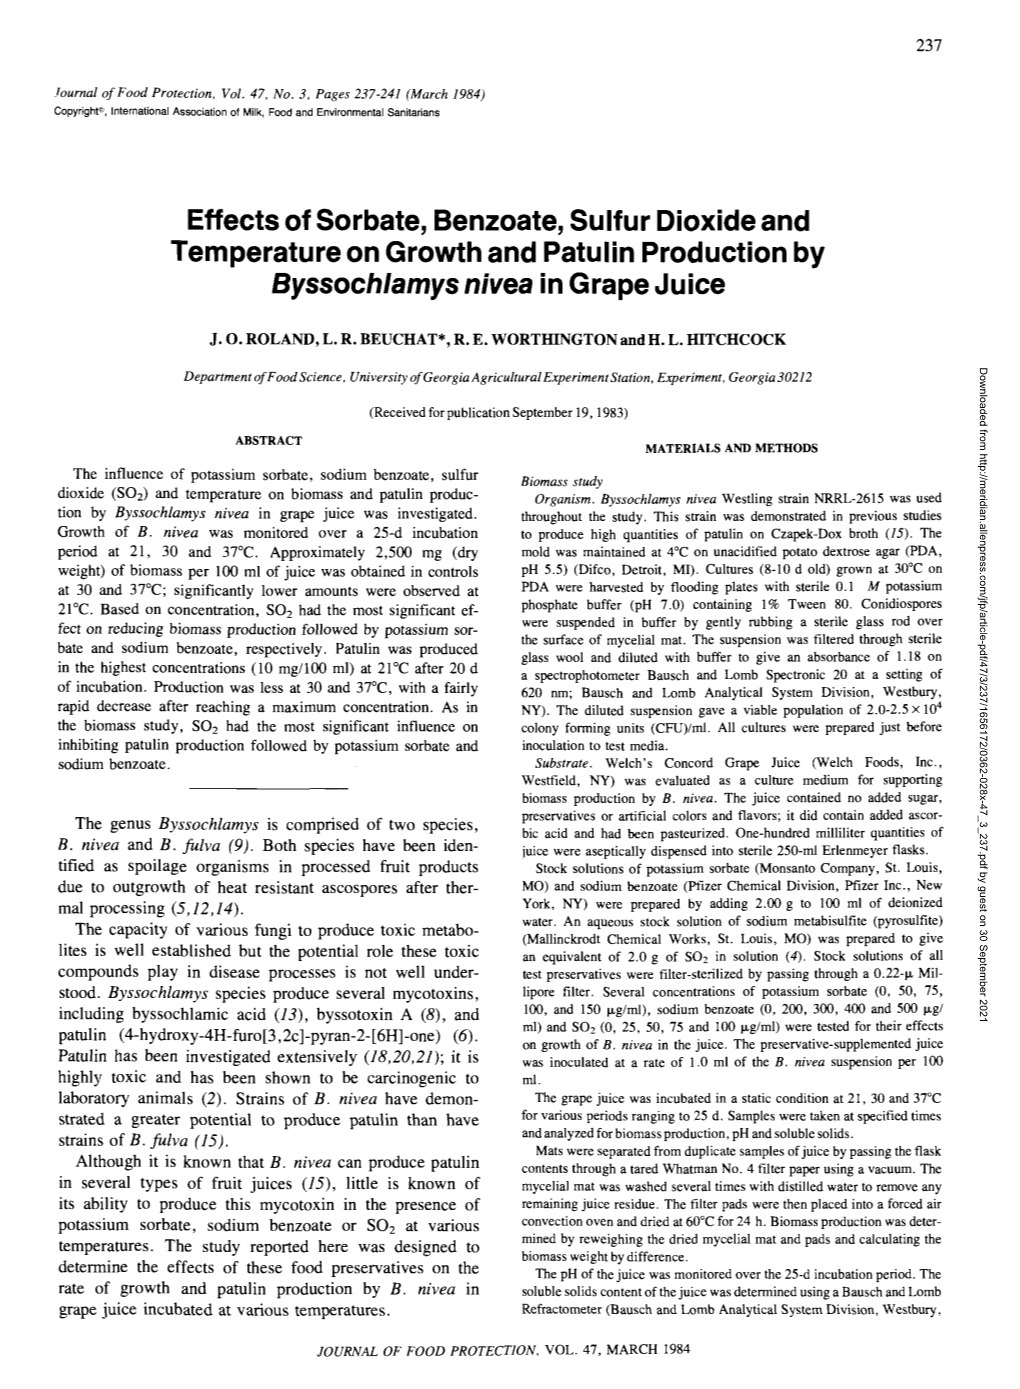 Effects of Sorbate, Benzoate, Sulfur Dioxide and Temperature on Growth and Patulin Production by Byssochlamys Nivea in Grape Juice